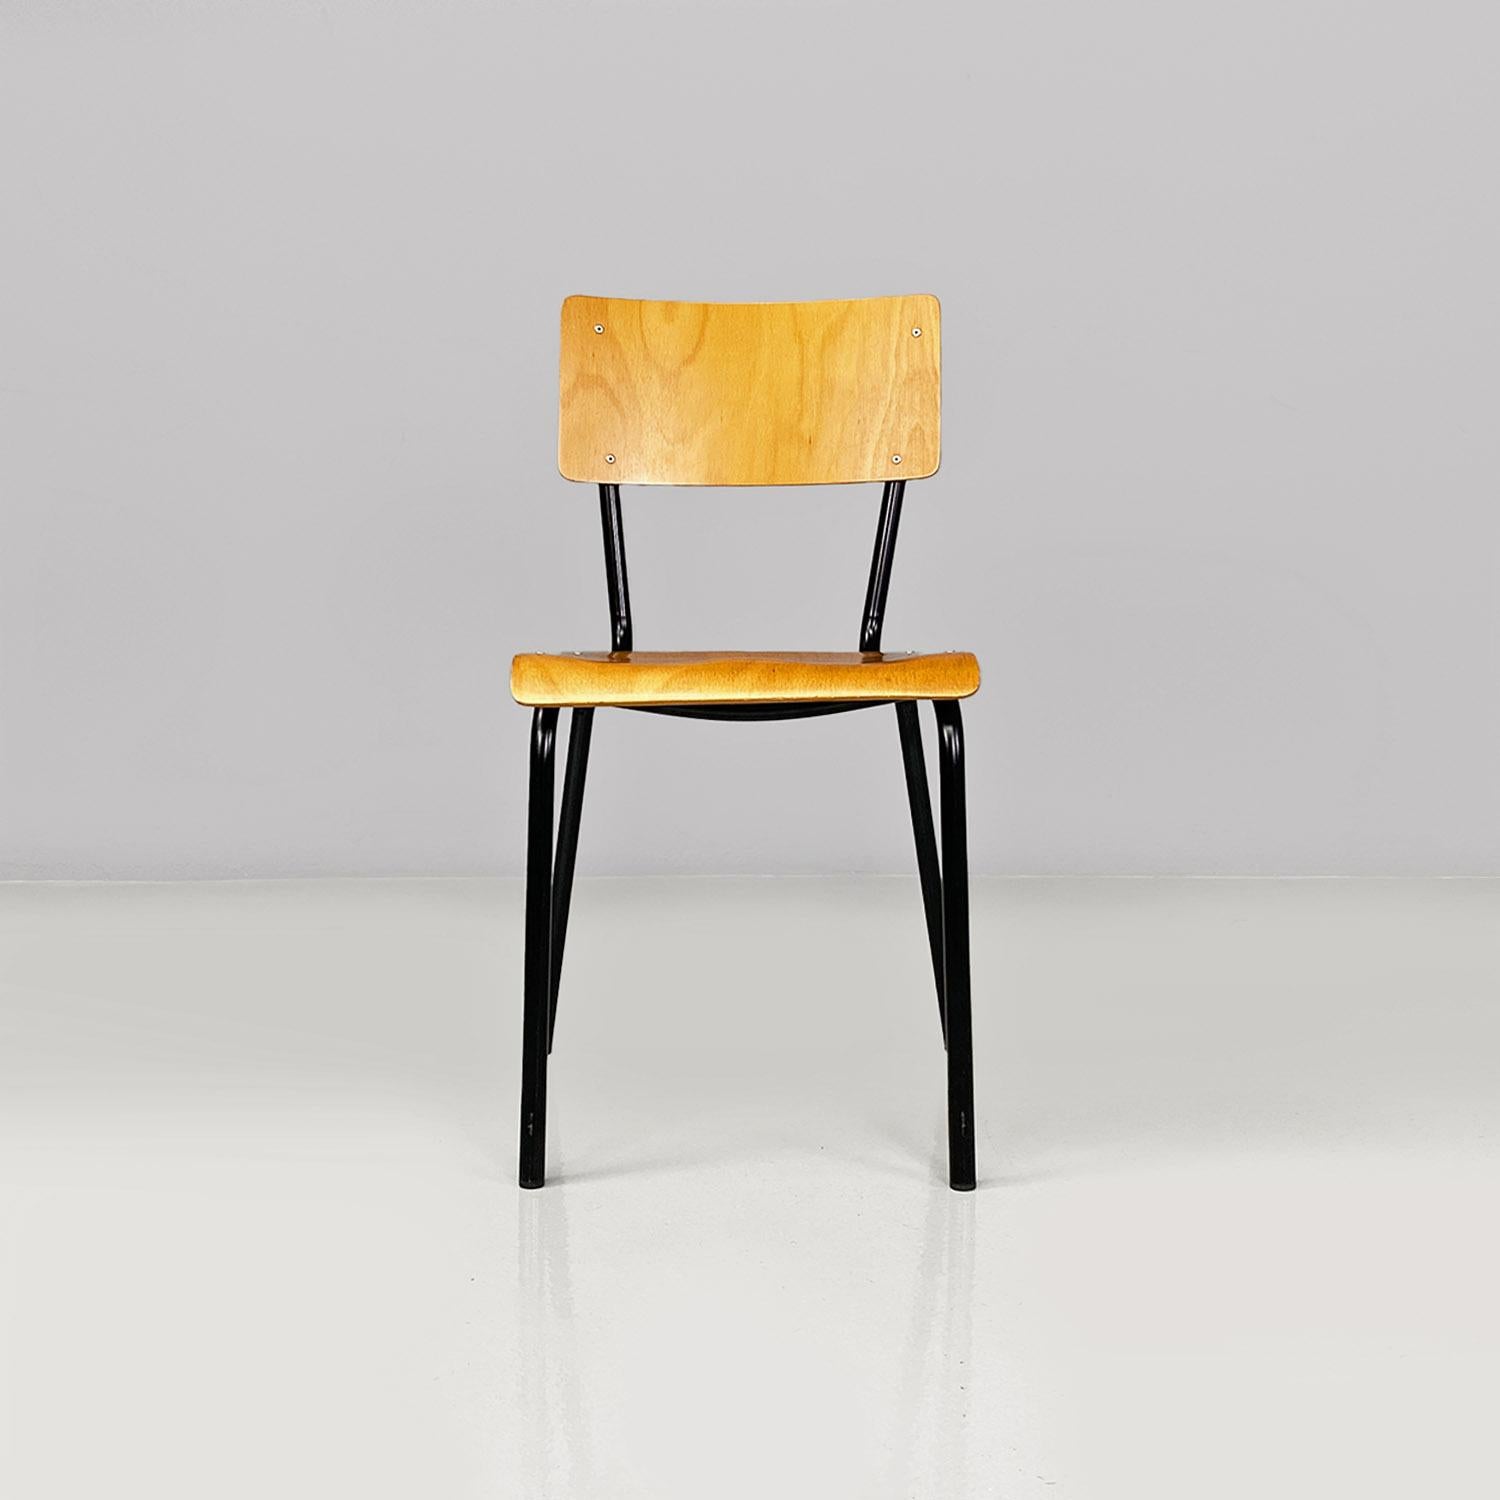 Italian mid-century modern beech and black tubolar metal school chairs, 1960s In Good Condition For Sale In MIlano, IT